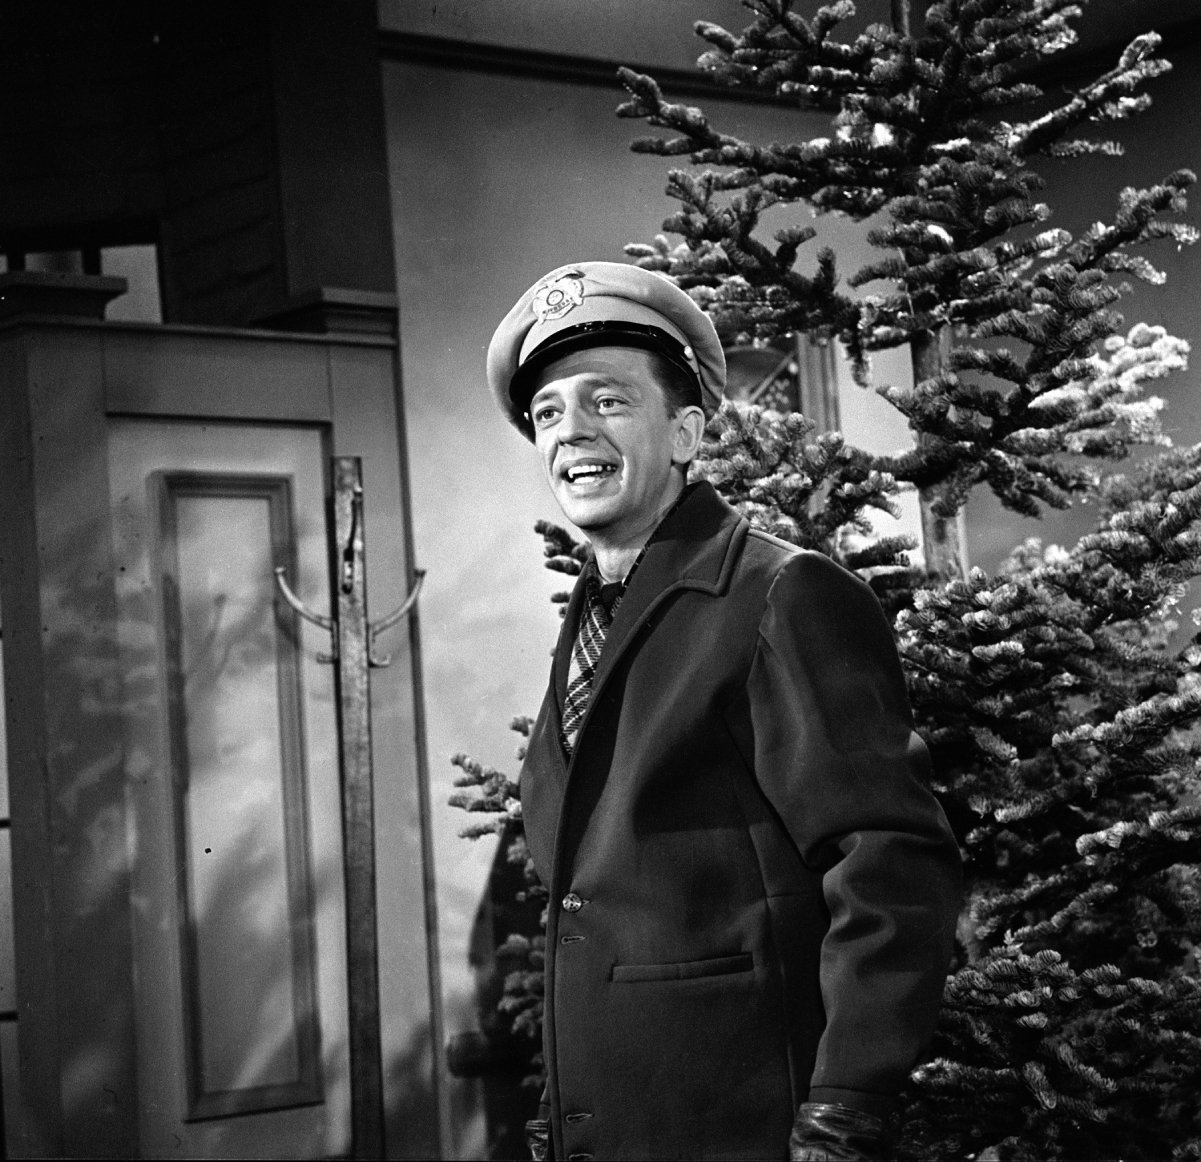 'The Andy Griffith Show' actor Don Knotts